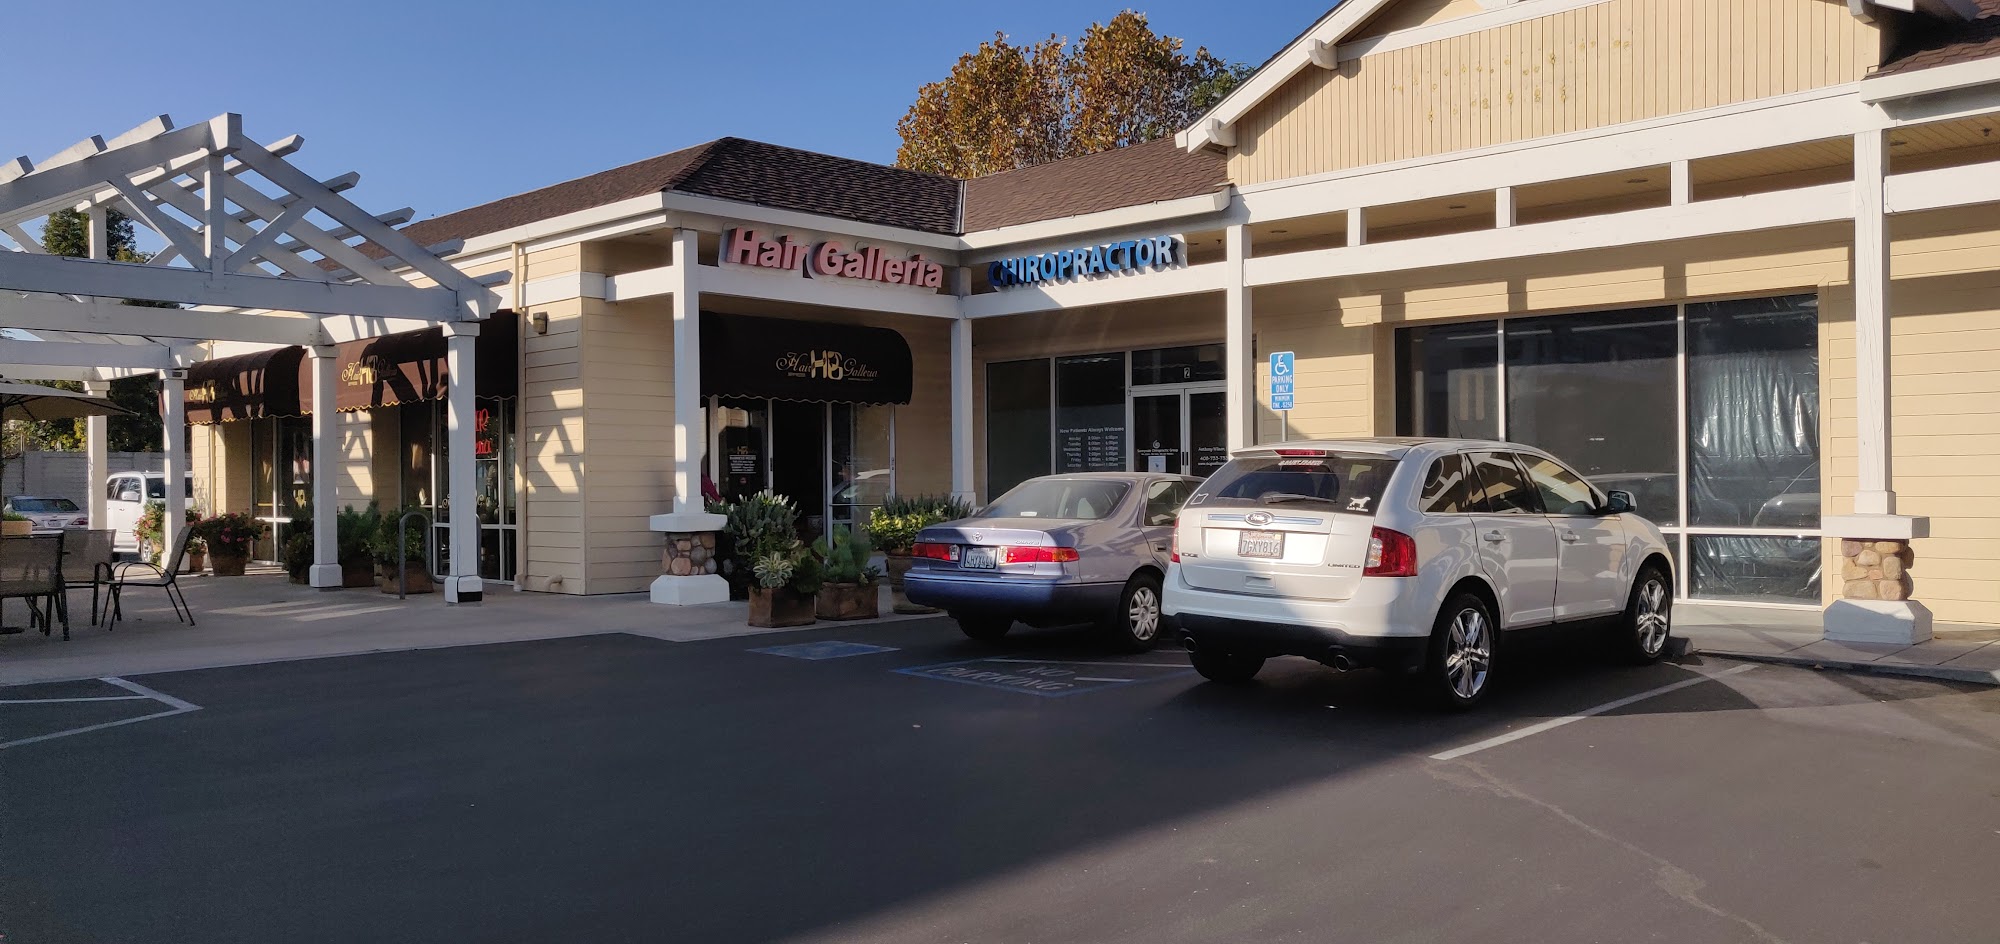 Sunnyvale Chiropractic Group